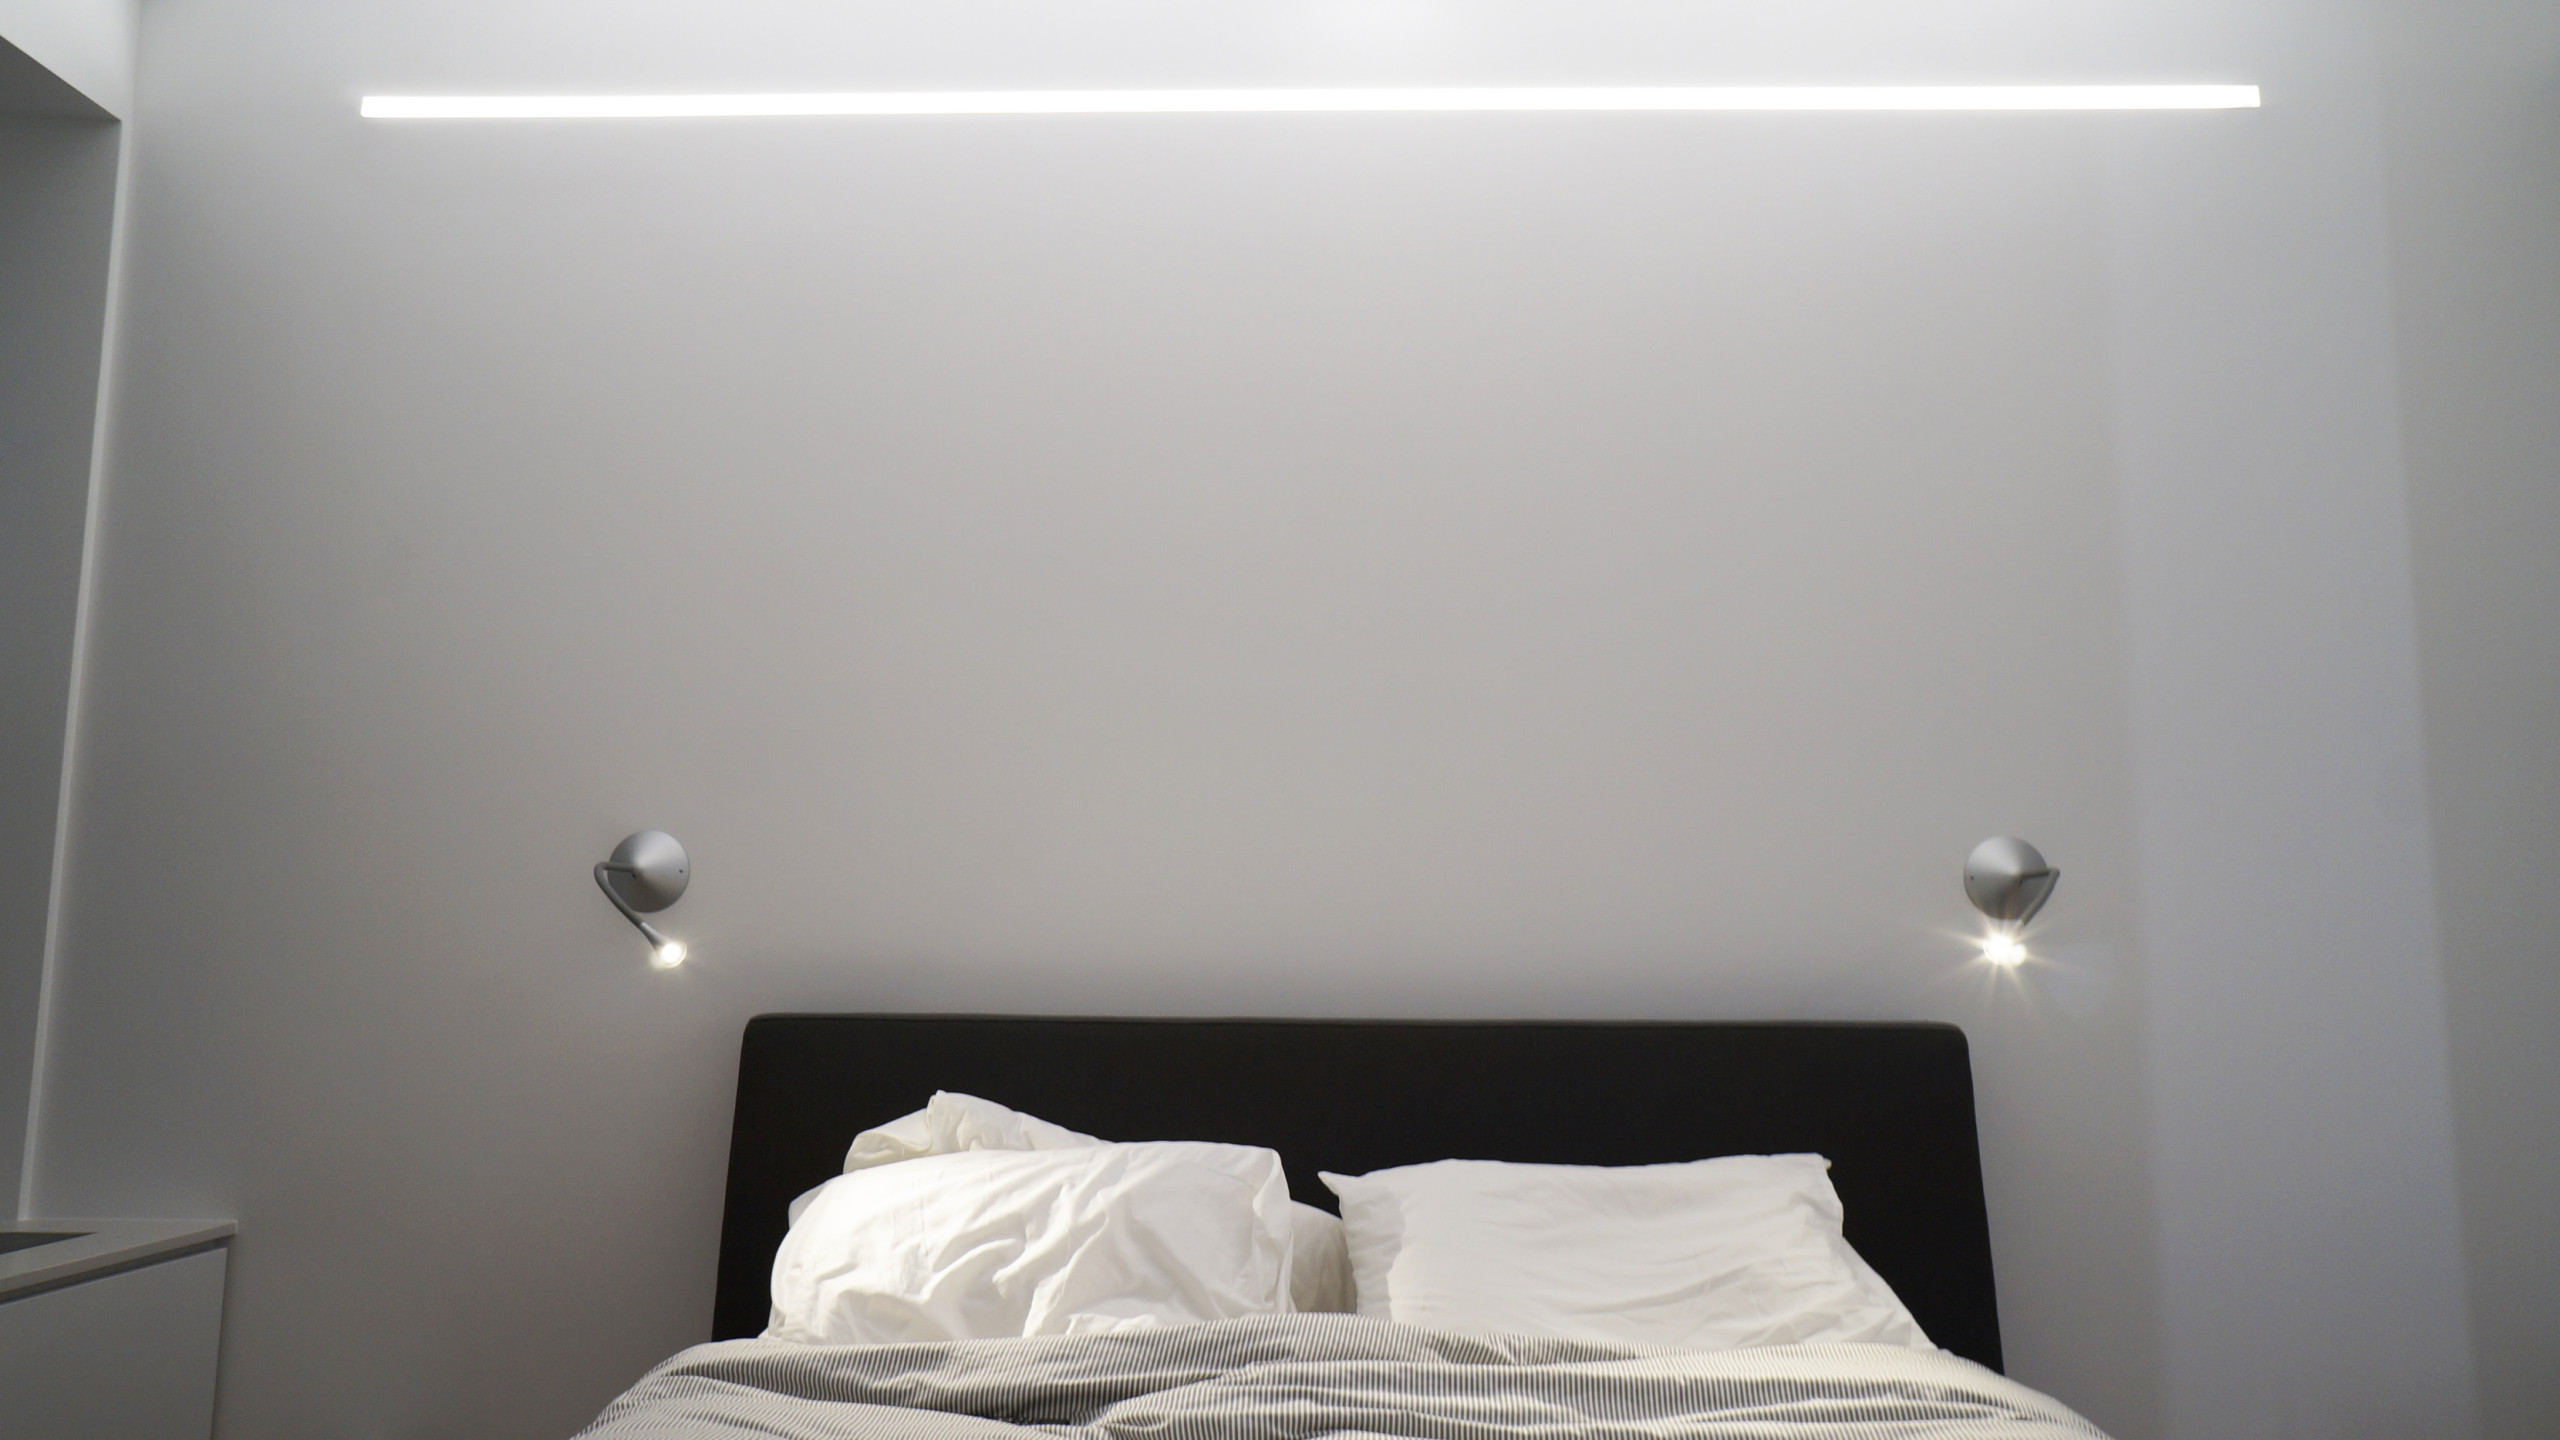 DETAIL  -  Bedroom and Linear Built in Ambient Light